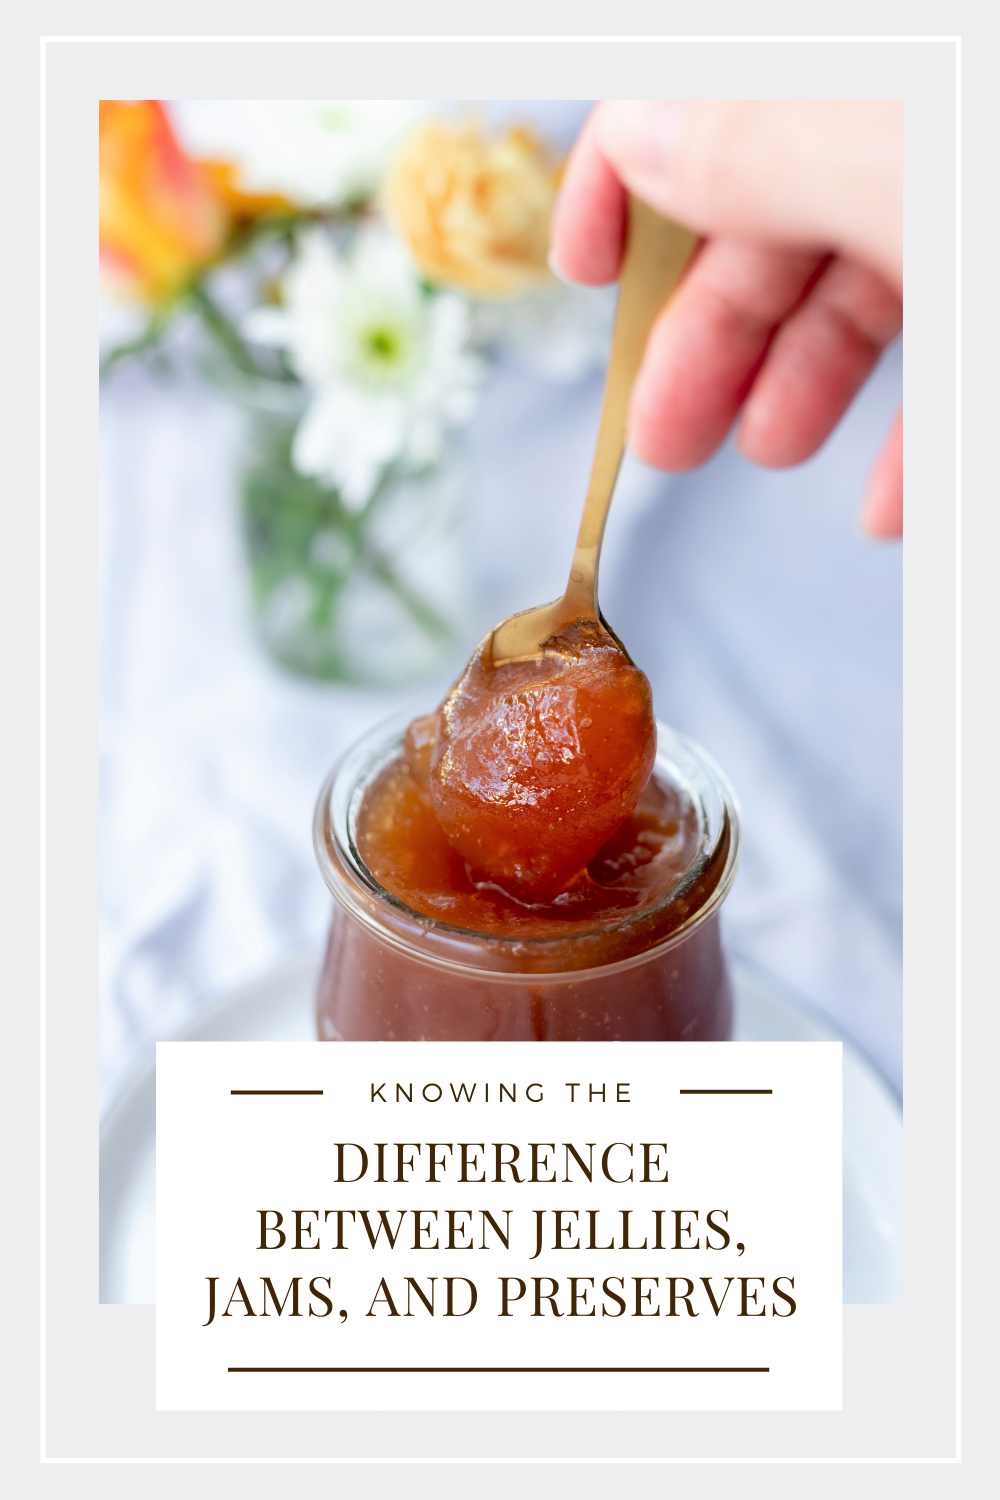 A spoon is being taken out of a glass container of jam. This article covers knowing the difference between jellies and jams.